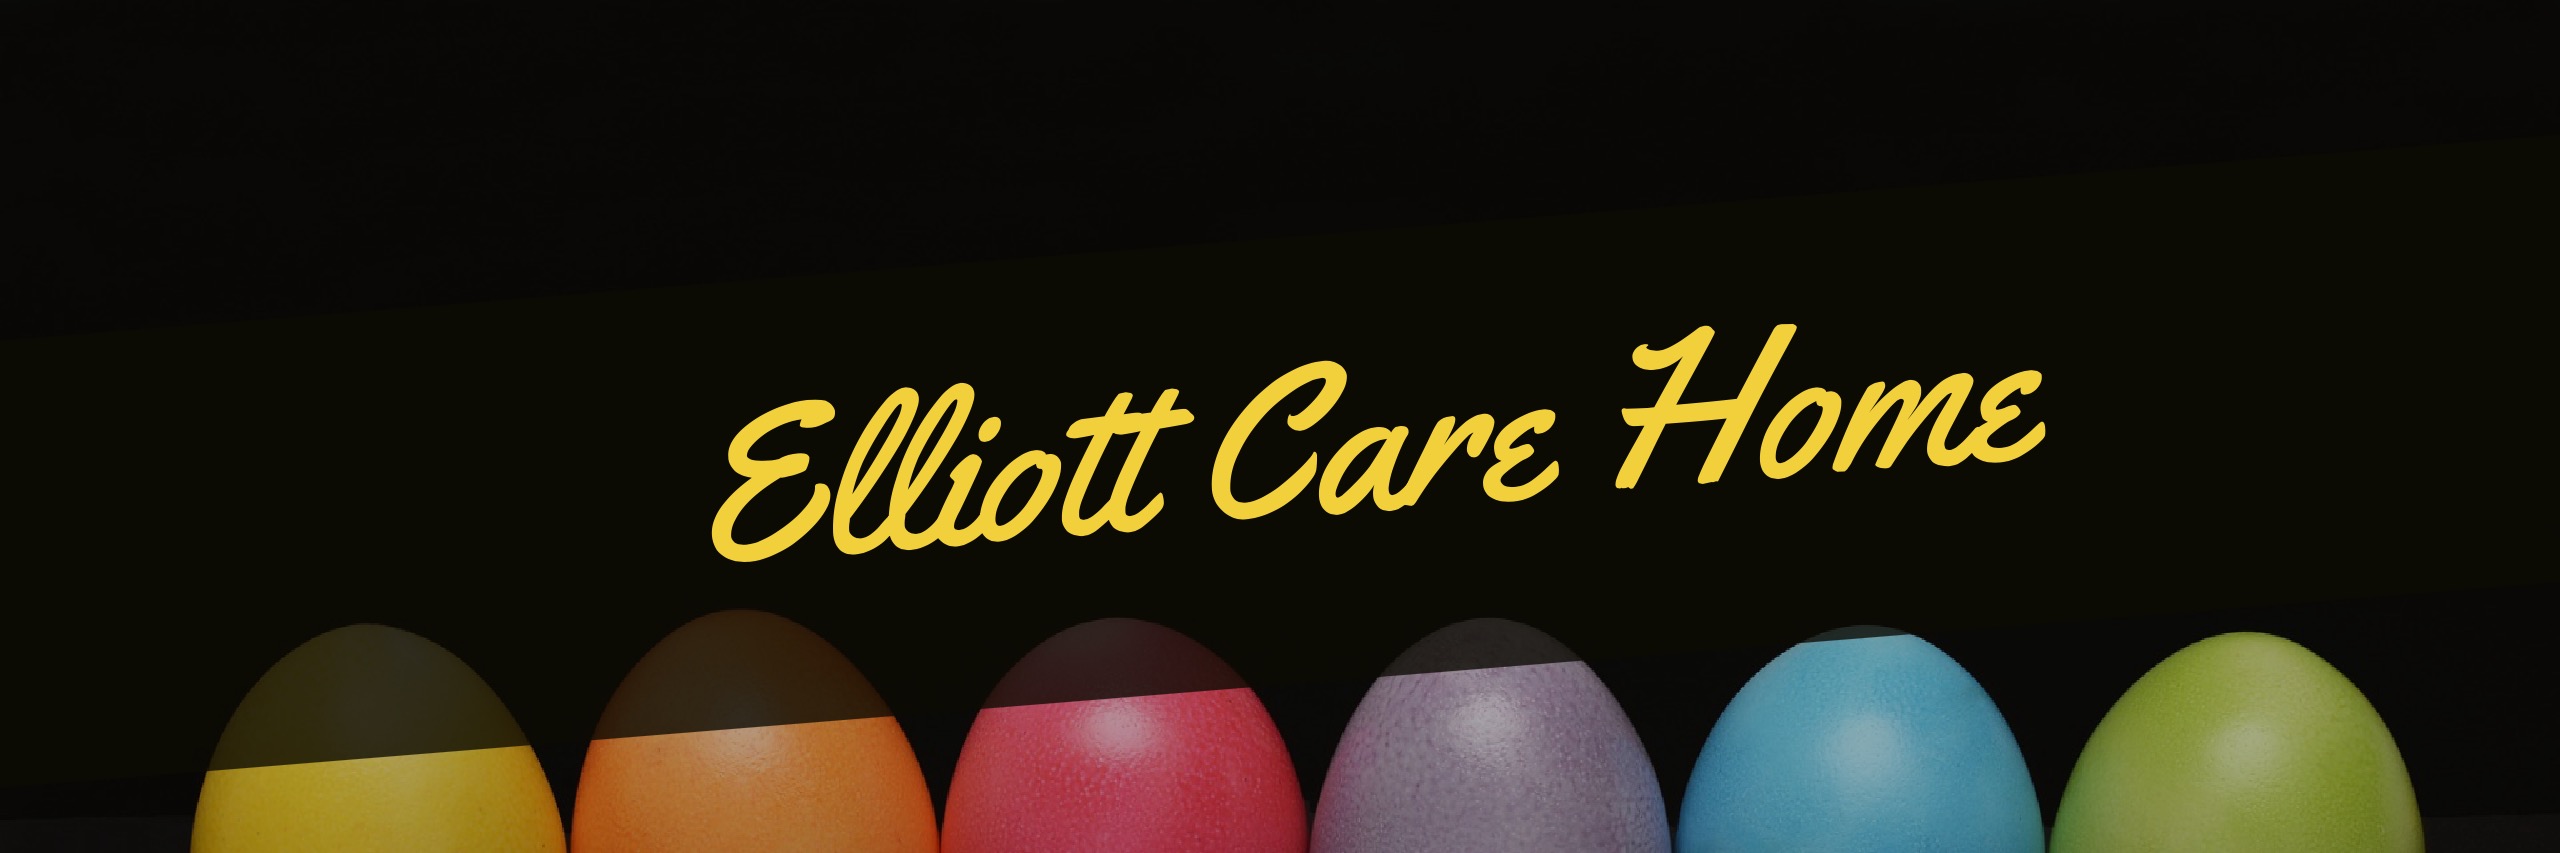 Elliott care home Leicester name you can trust